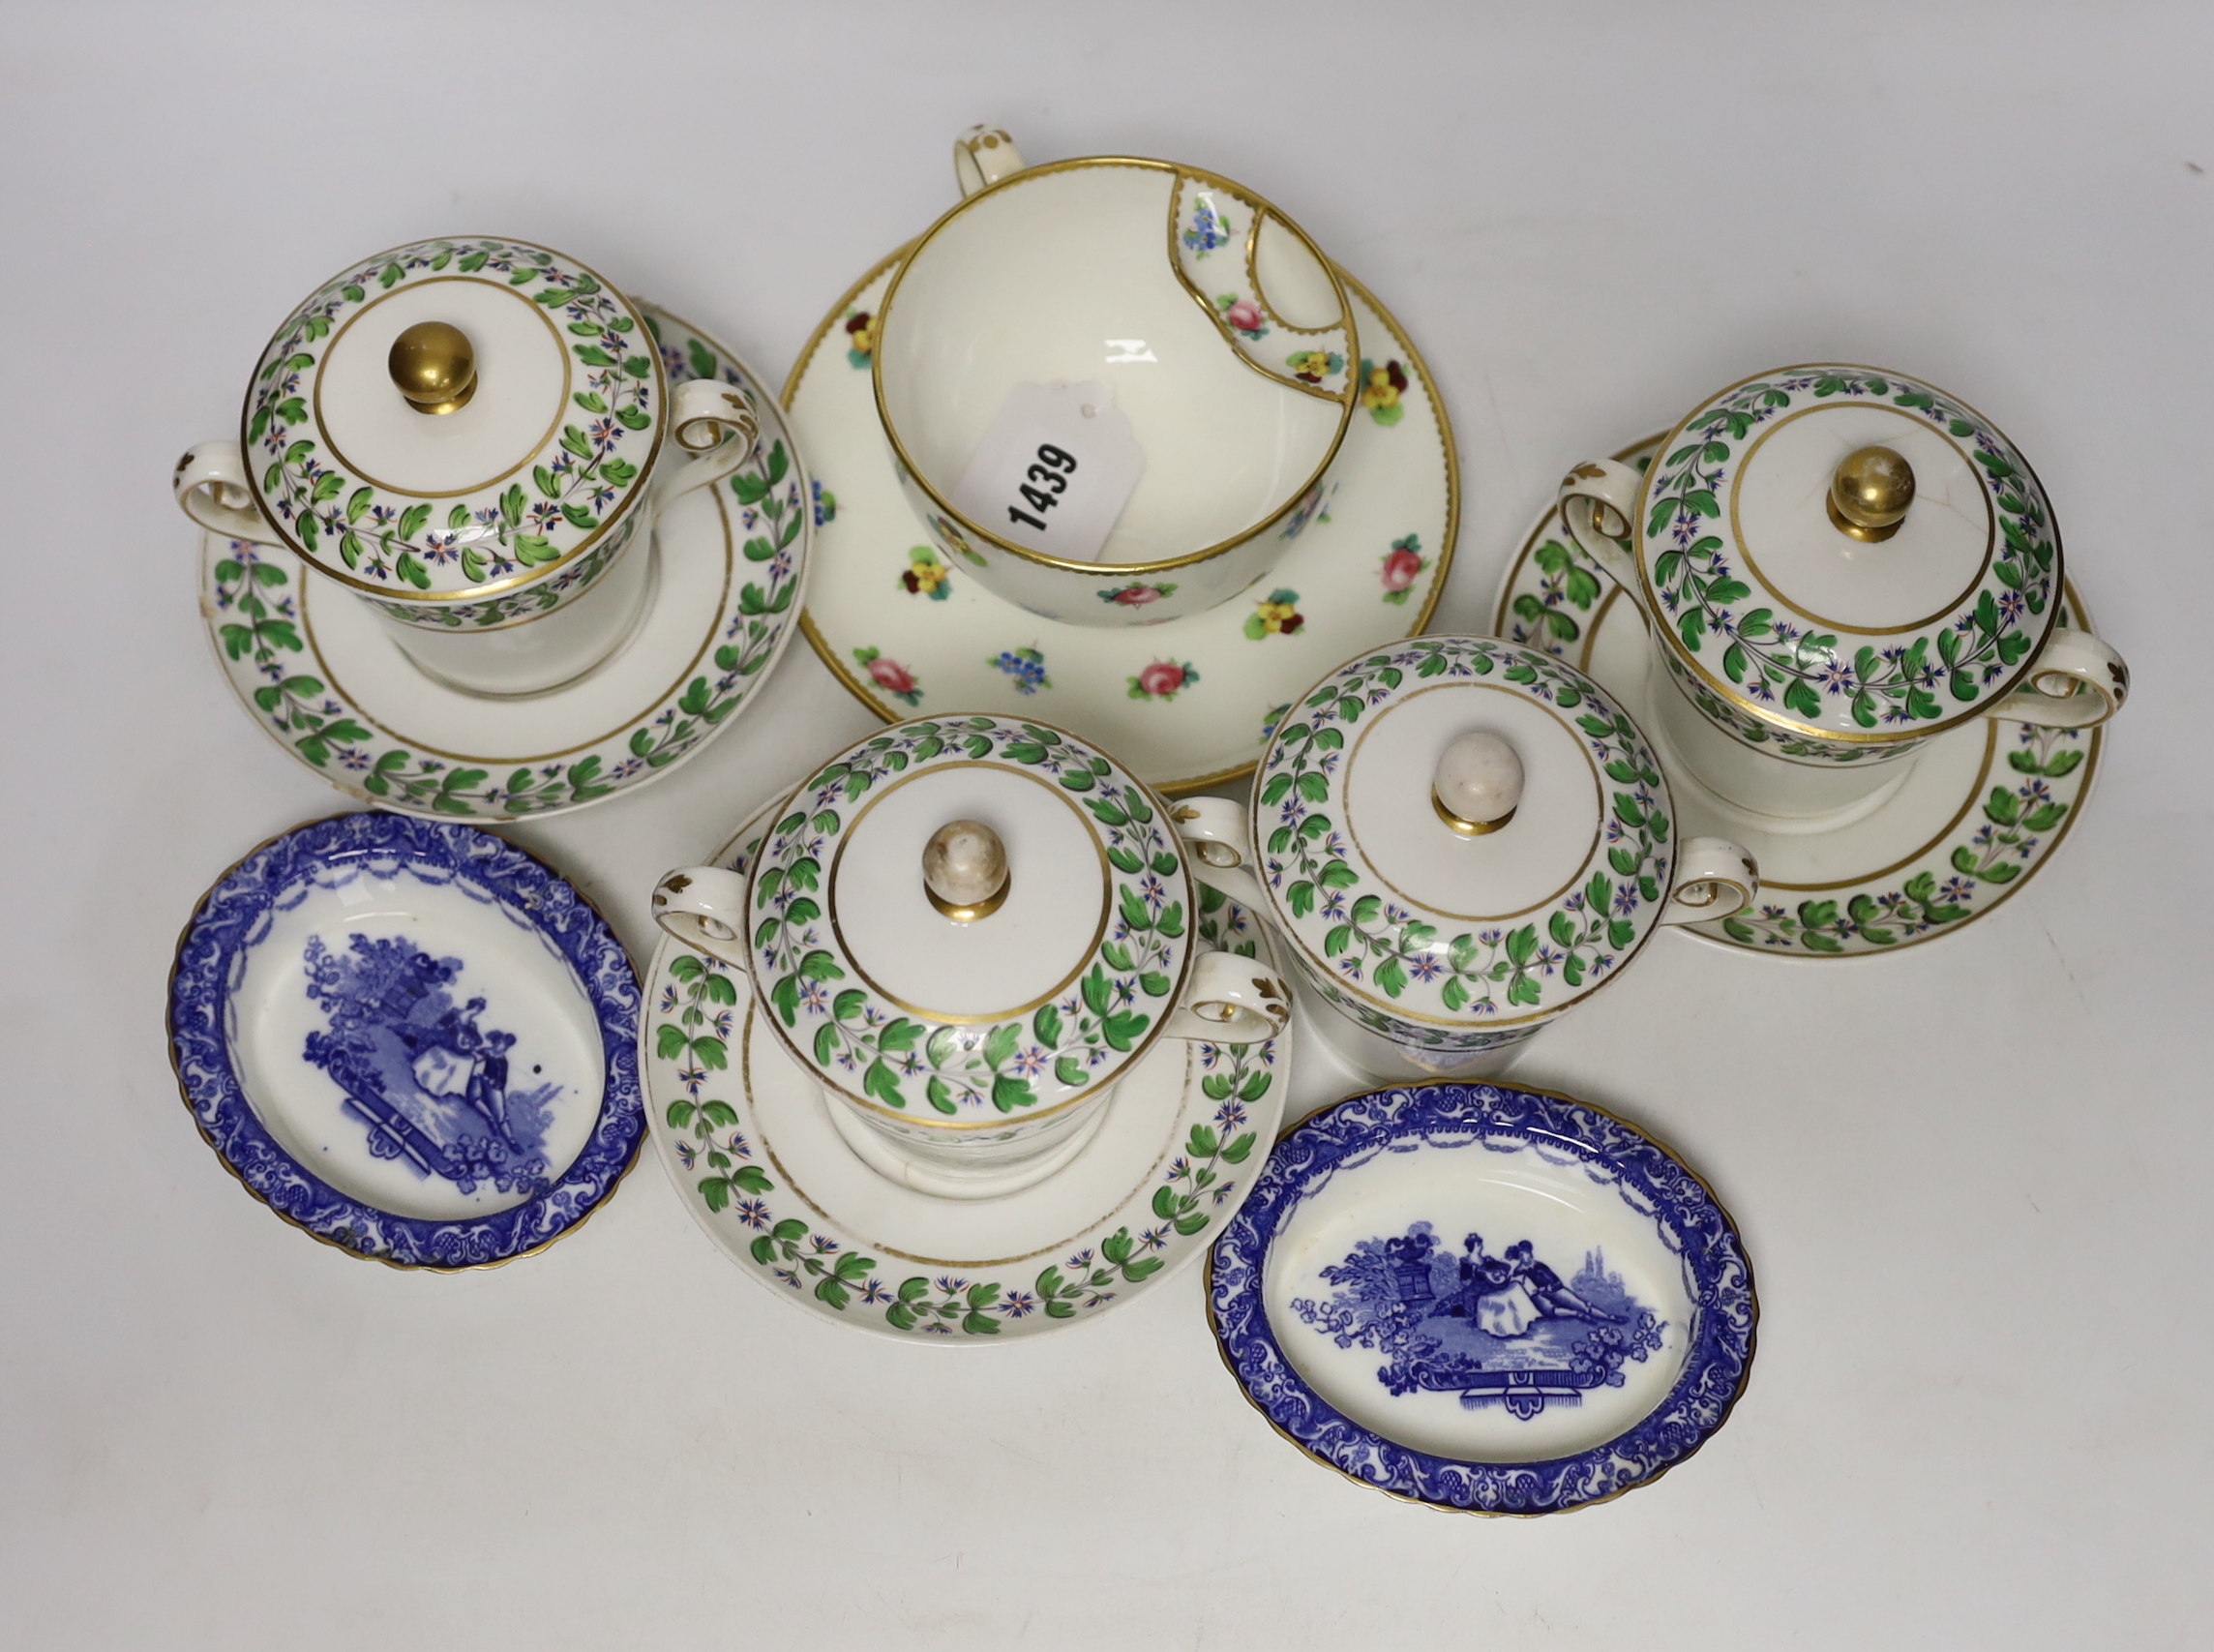 A moustache cup and other English tableware including a pair of Royal Doulton blue and white printed dishes